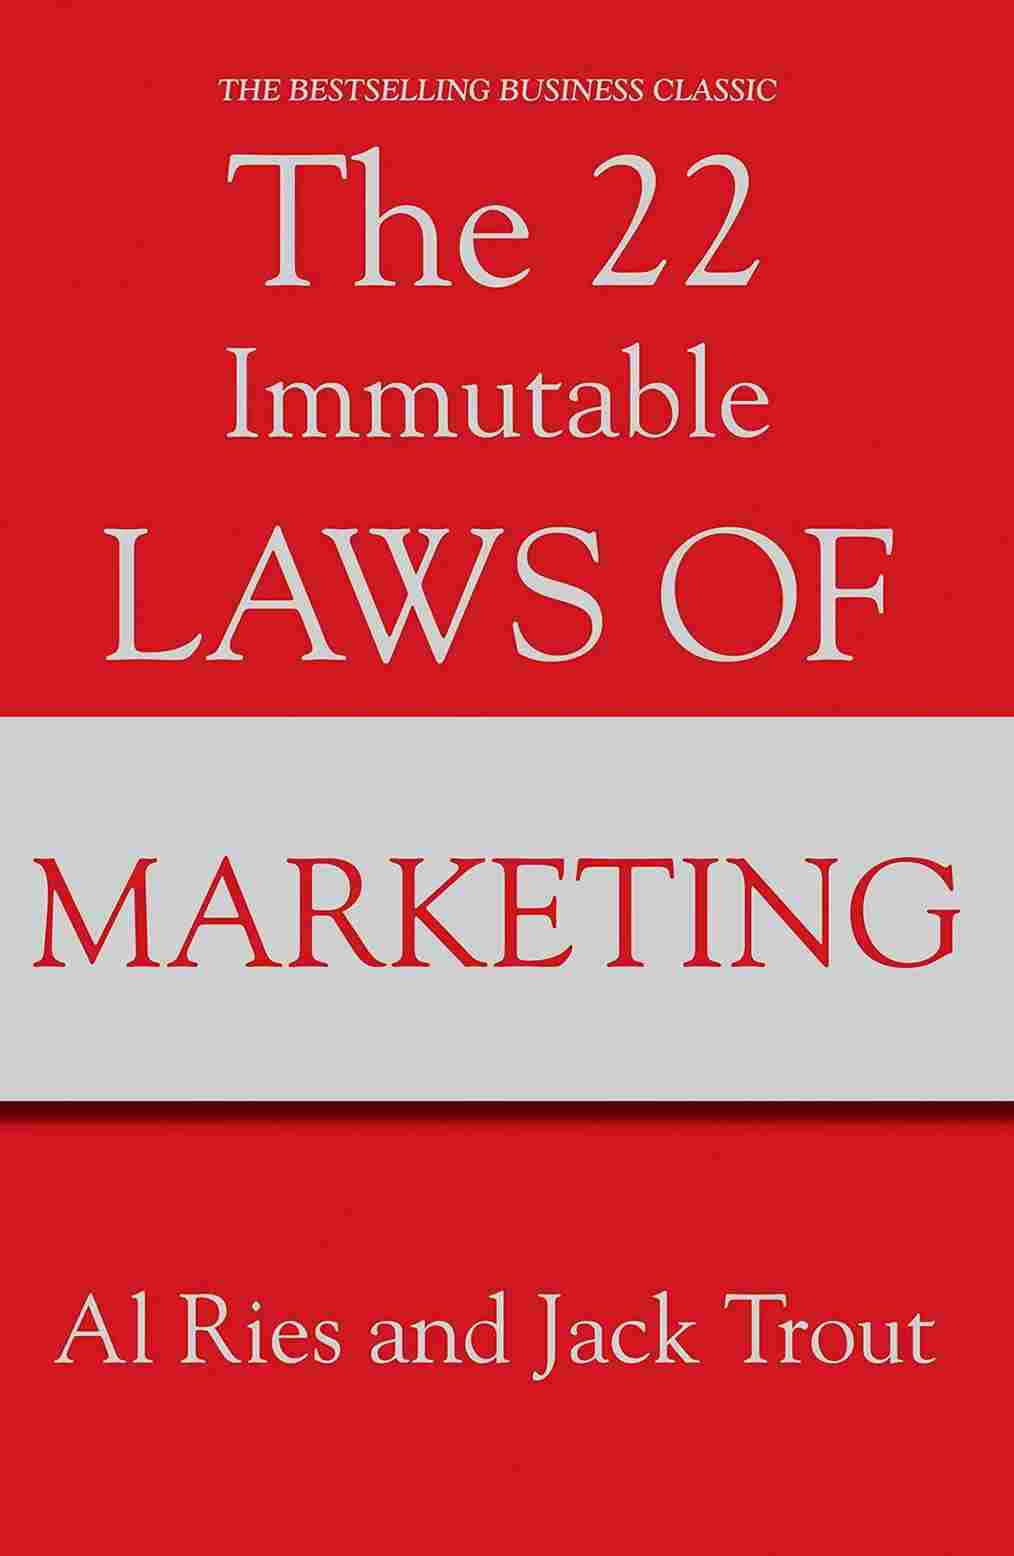 The 22 Immutable Laws Of Marketing - Al Ries